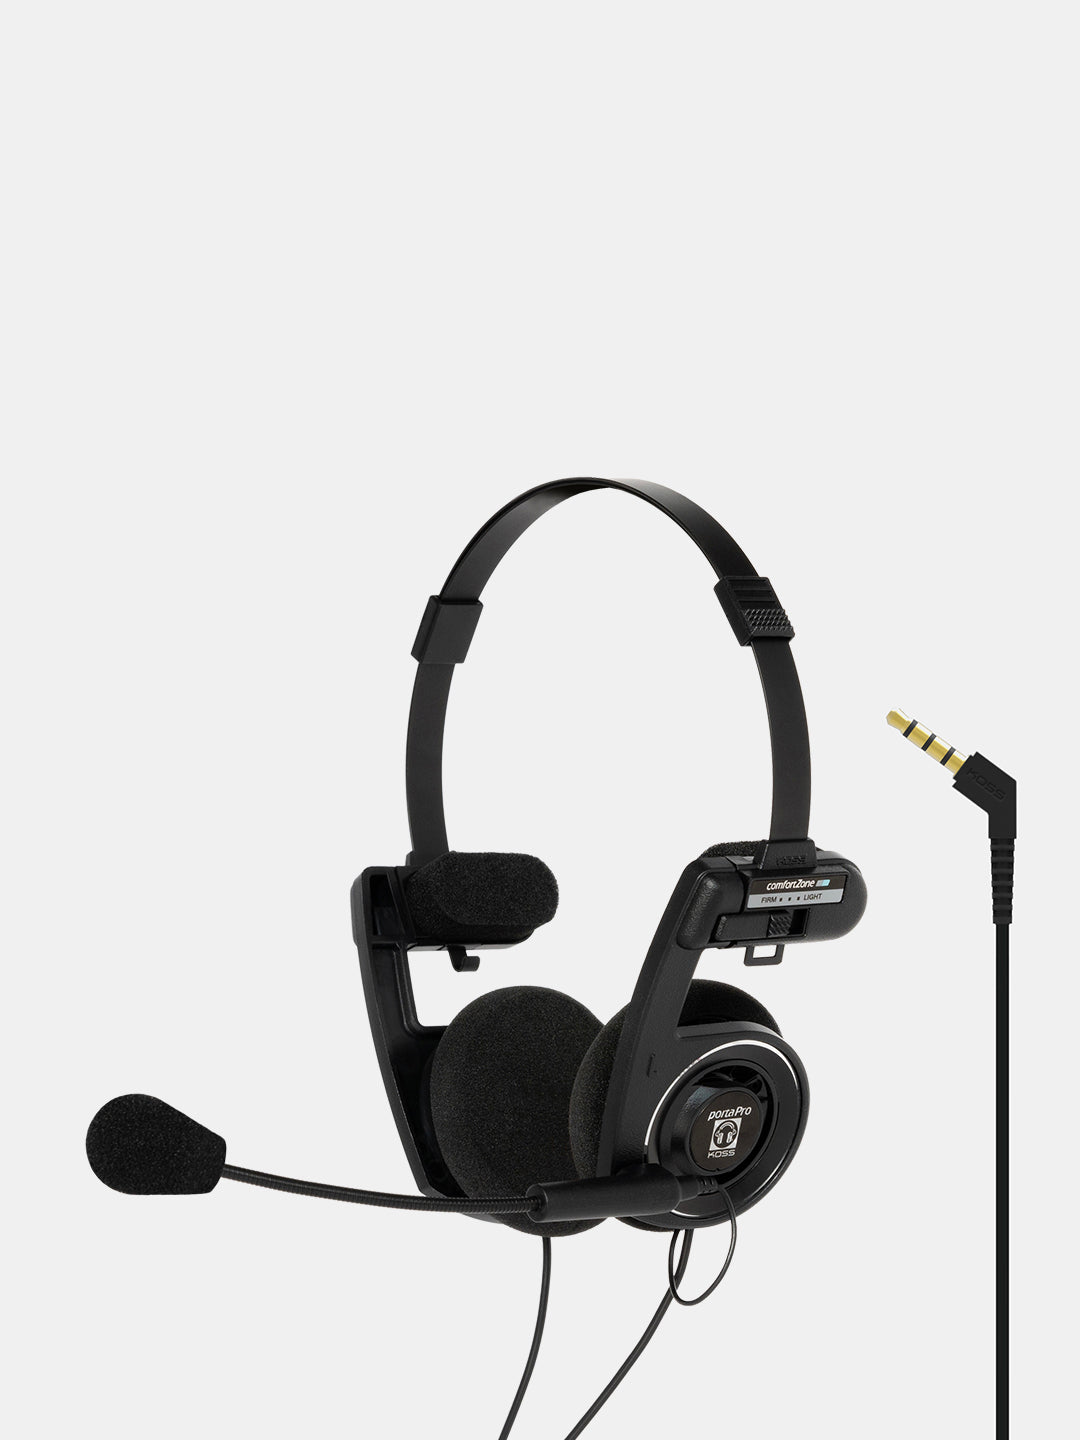 Koss Porta Pro Limited Edition Black Gold On-Ear Headphones, in-Line  Microphone, Volume Control and Touch Remote Control, Includes Hard Carrying  Case